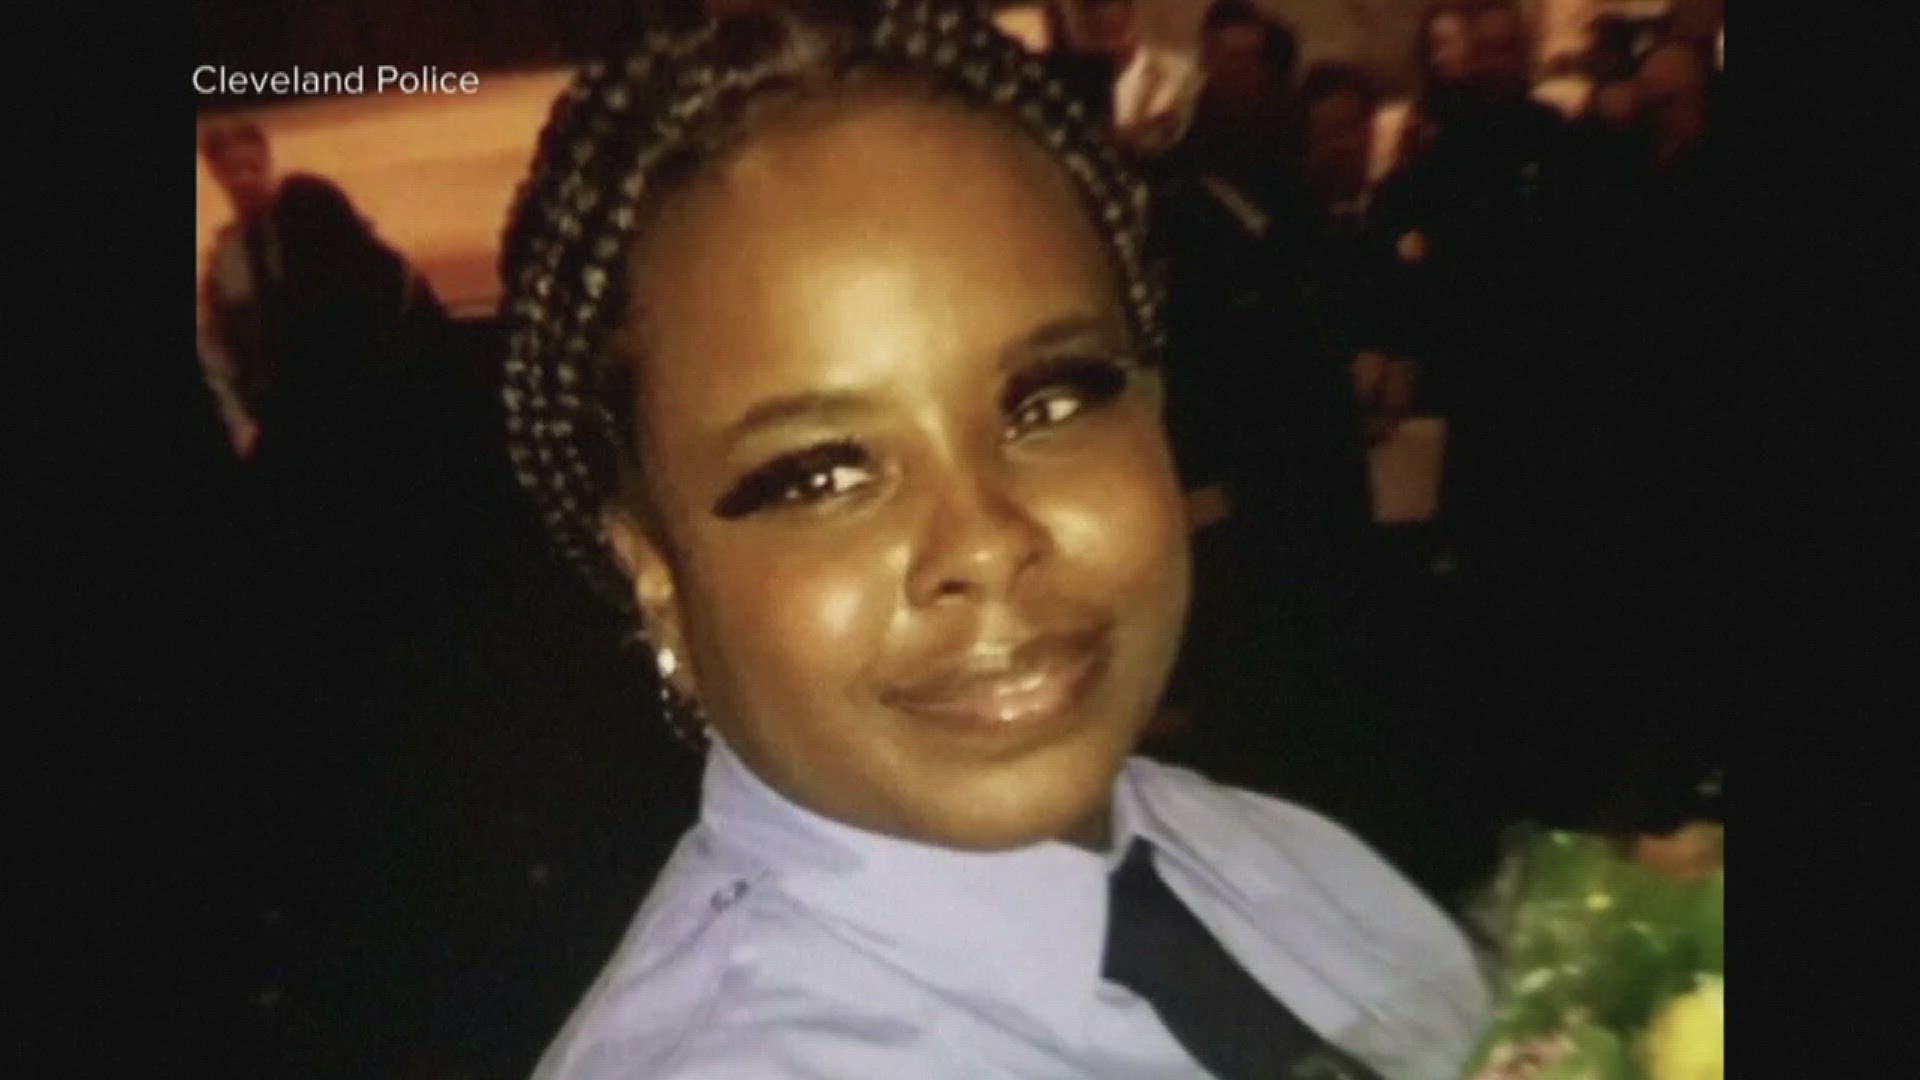 The EMT walked into a convenience store and called police. The reported kidnapping took place just days before she was set to testify in a rape and kidnapping case.